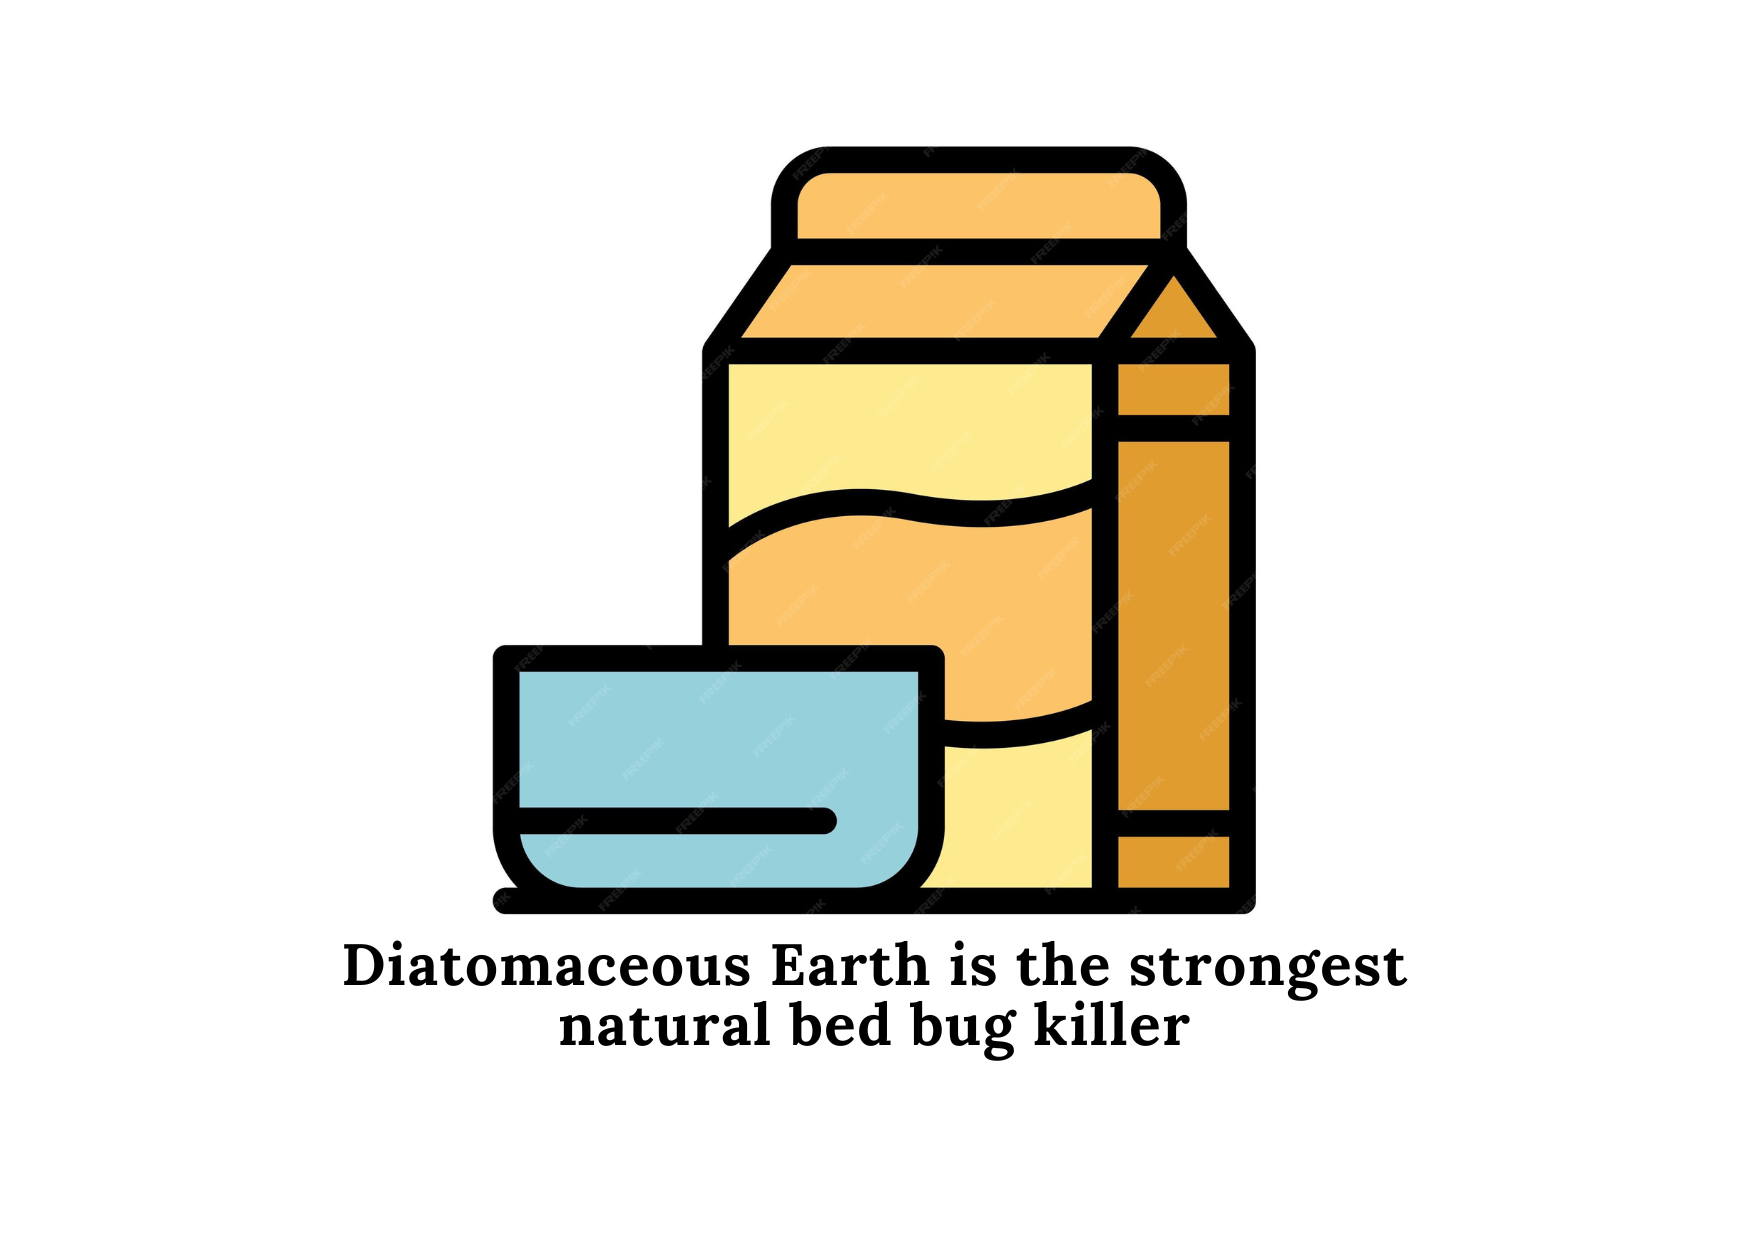 Diatomaceous Earth is the strongest natural bed bug killer